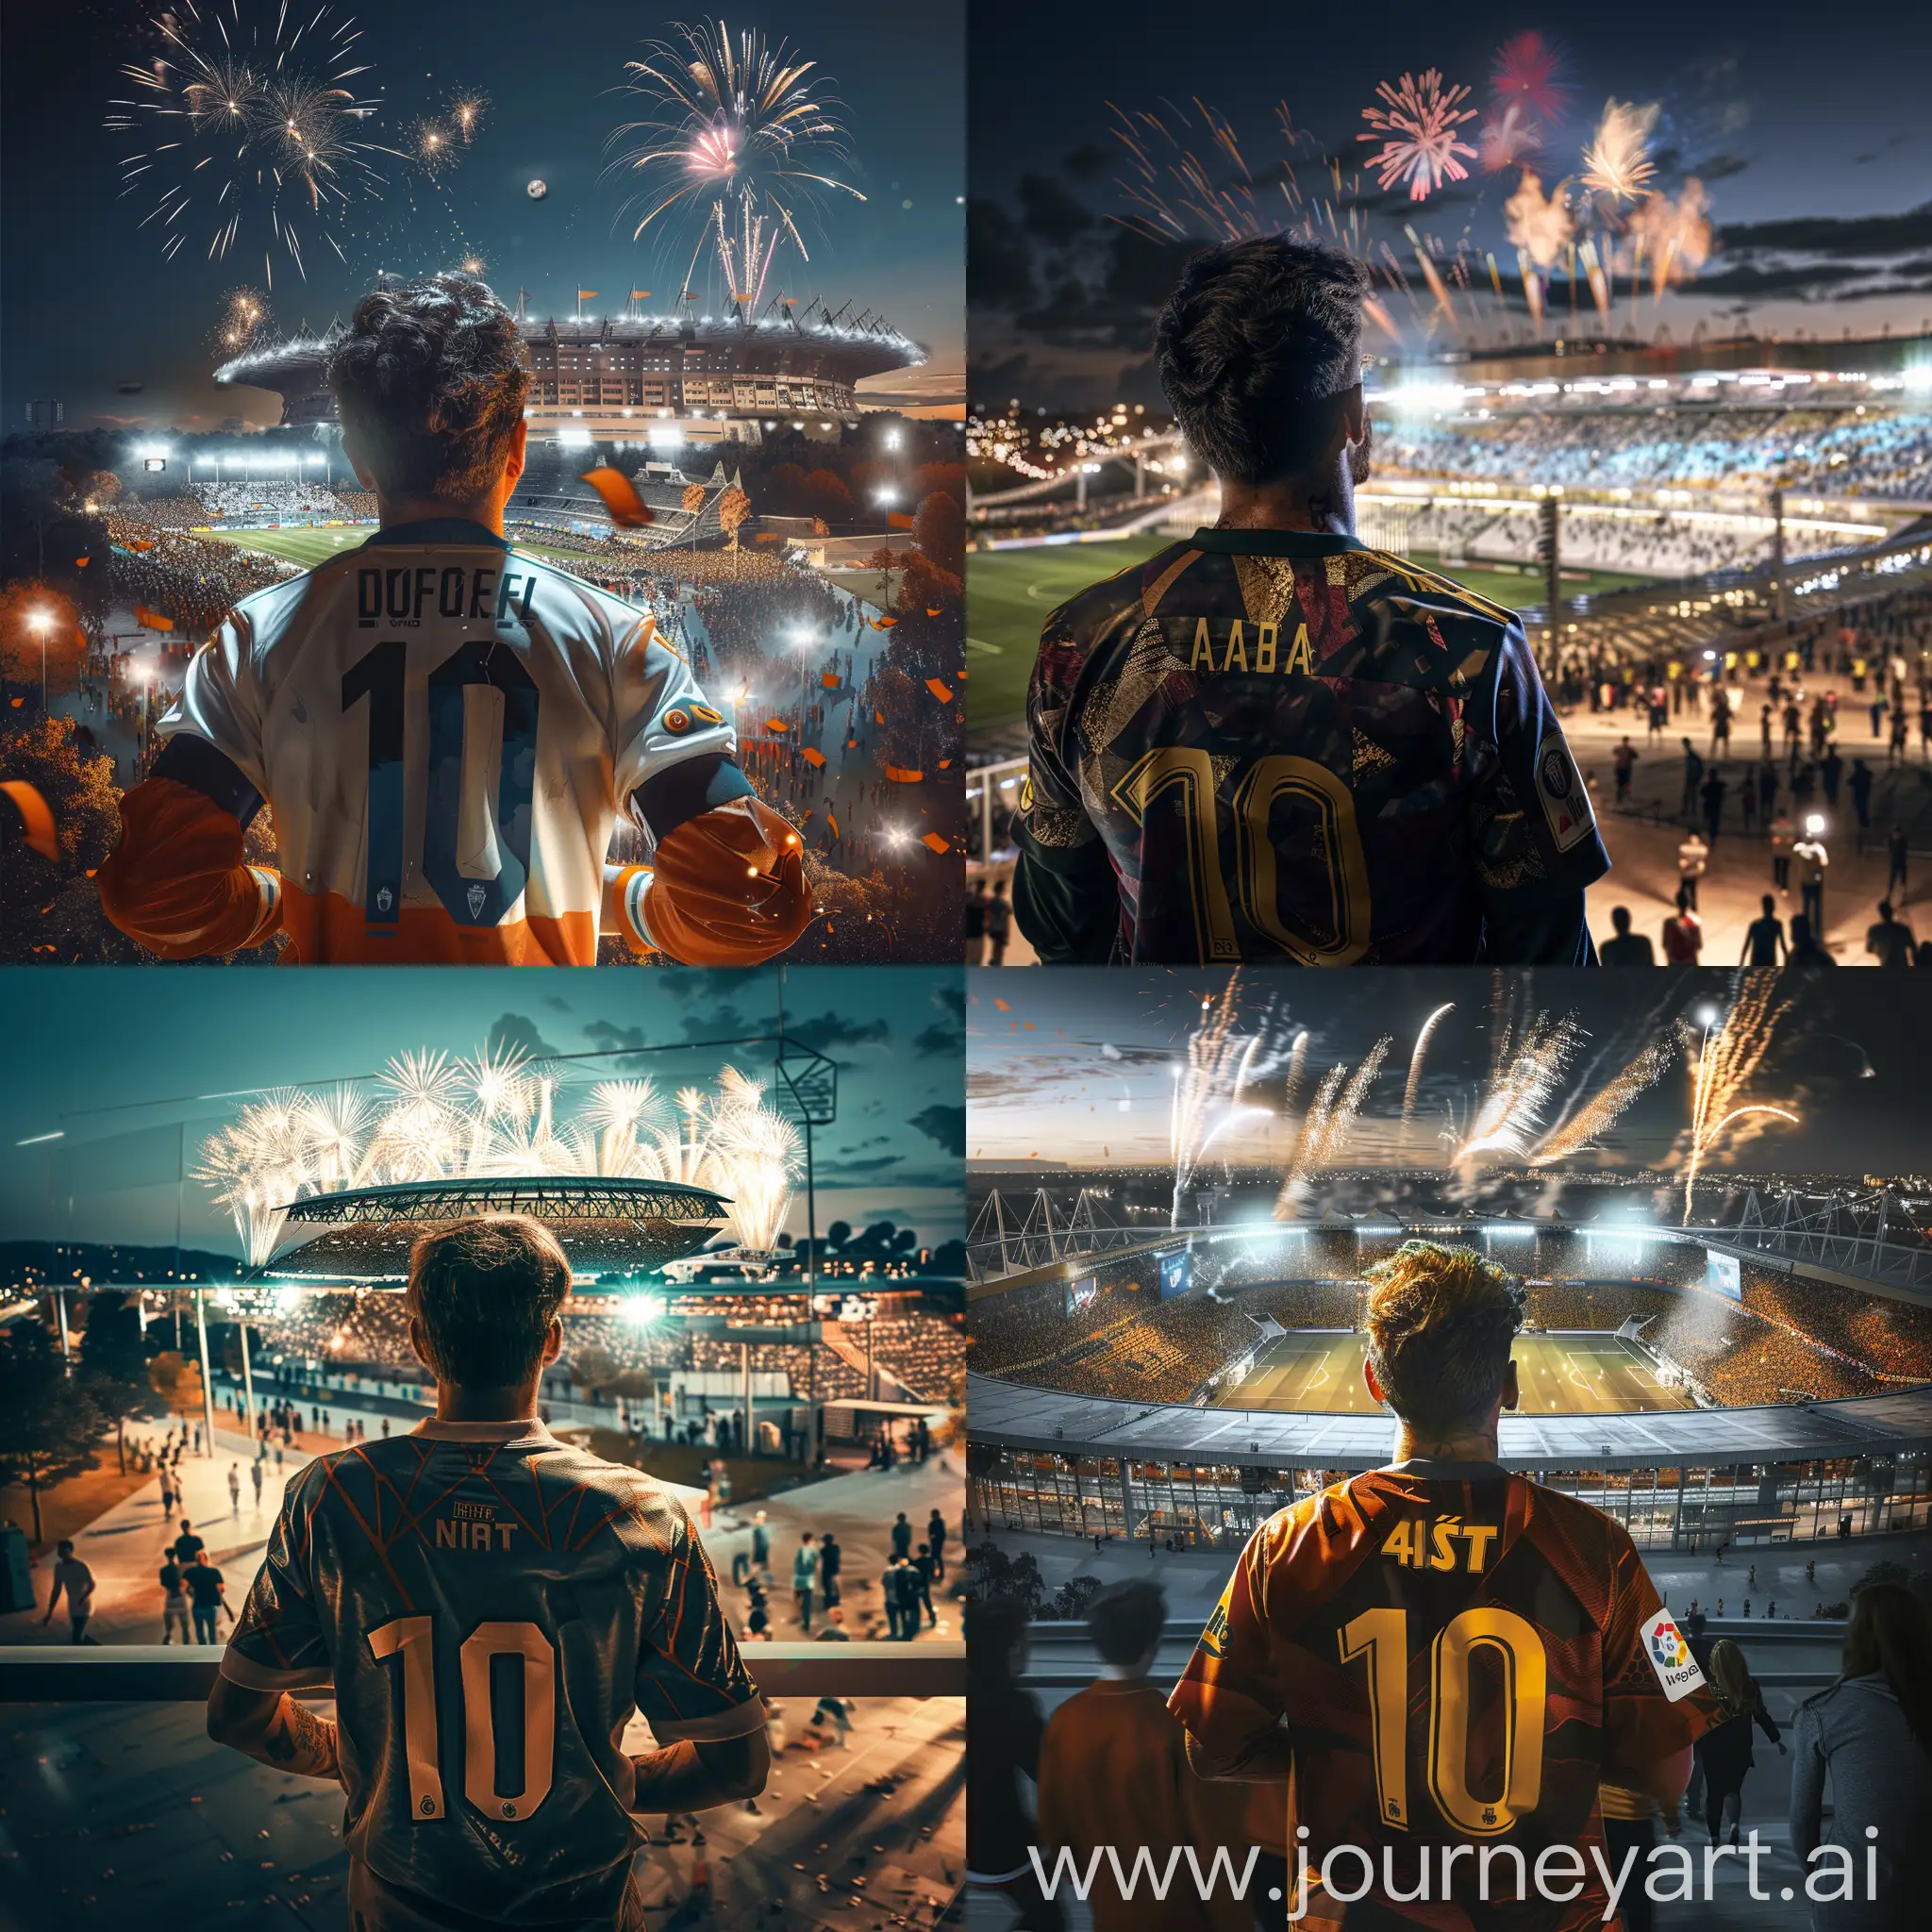 4K image of a passionate football fan, wearing a complete kit with a number 10 jersey. His gaze is fixed on a distant stadium, lively fans making their way towards it. The daylight highlights his excitement, foreshadowing a memorable sports event. The panoramic view and approaching cheers create a lively atmosphere. The scene transitions to night, illuminated by fireworks above the stadium
